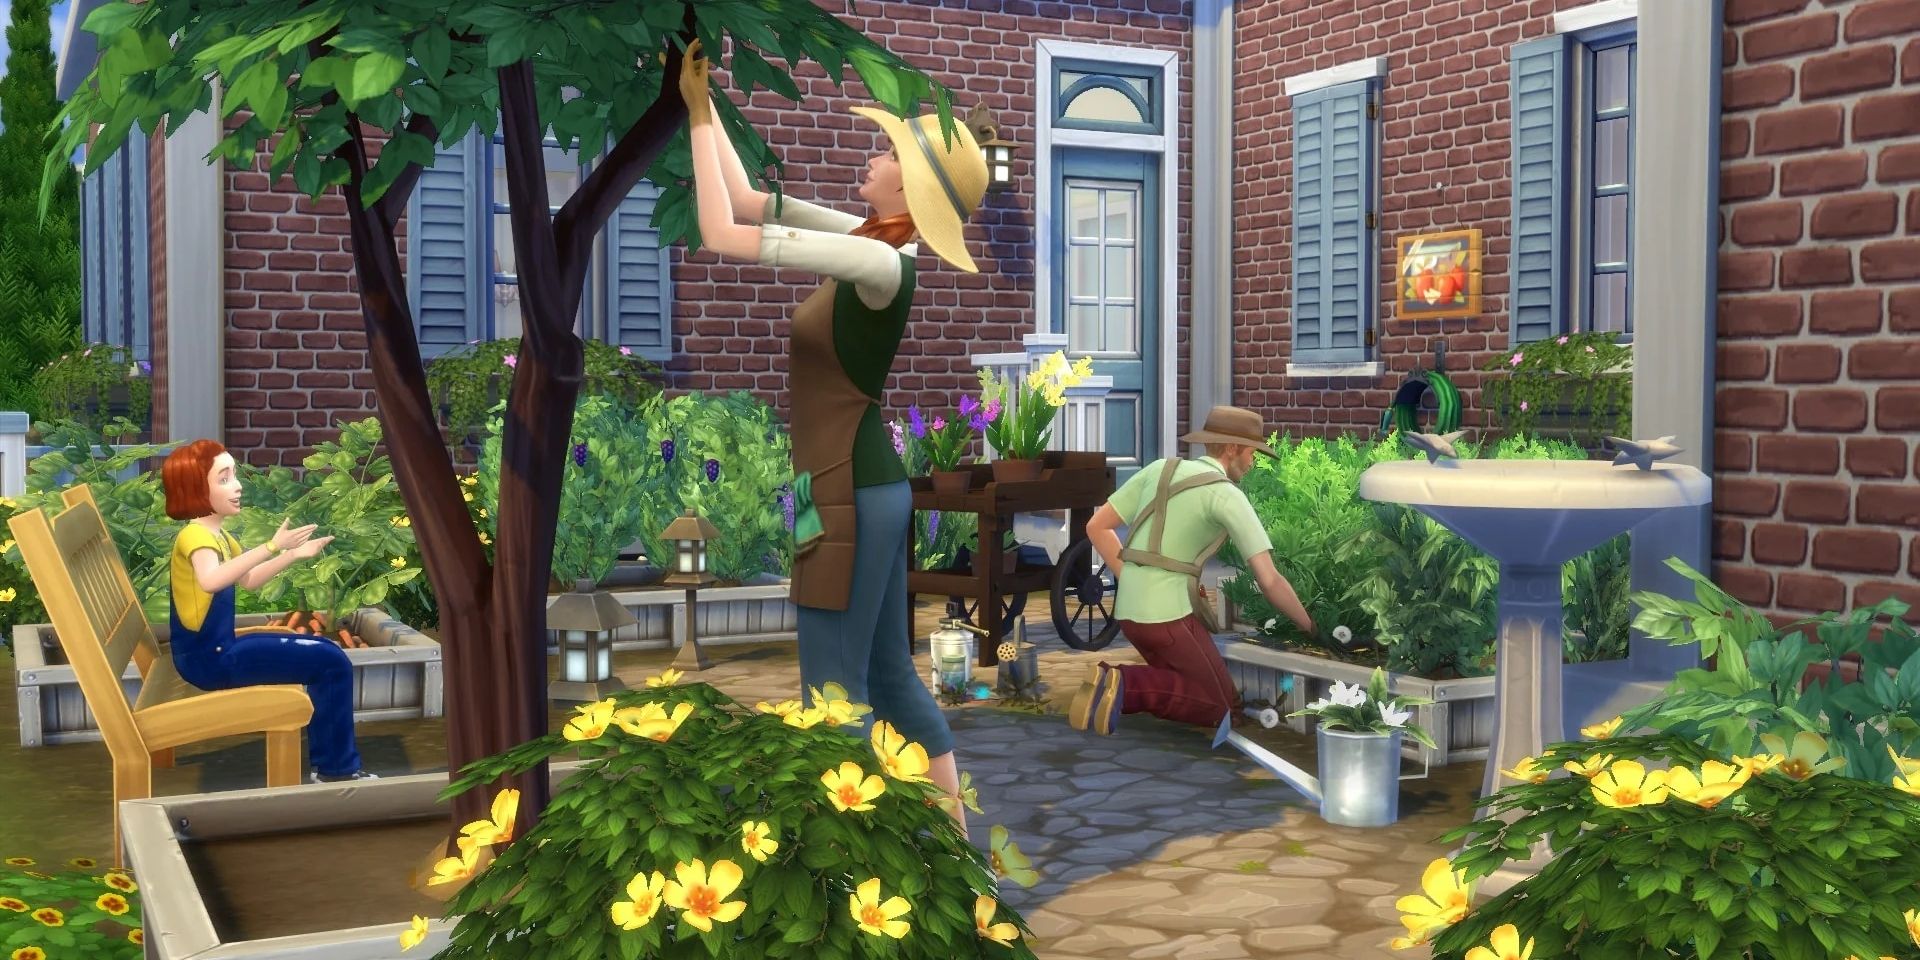 Two Sims tending to a tree and plants while a child Sim watches on a bench